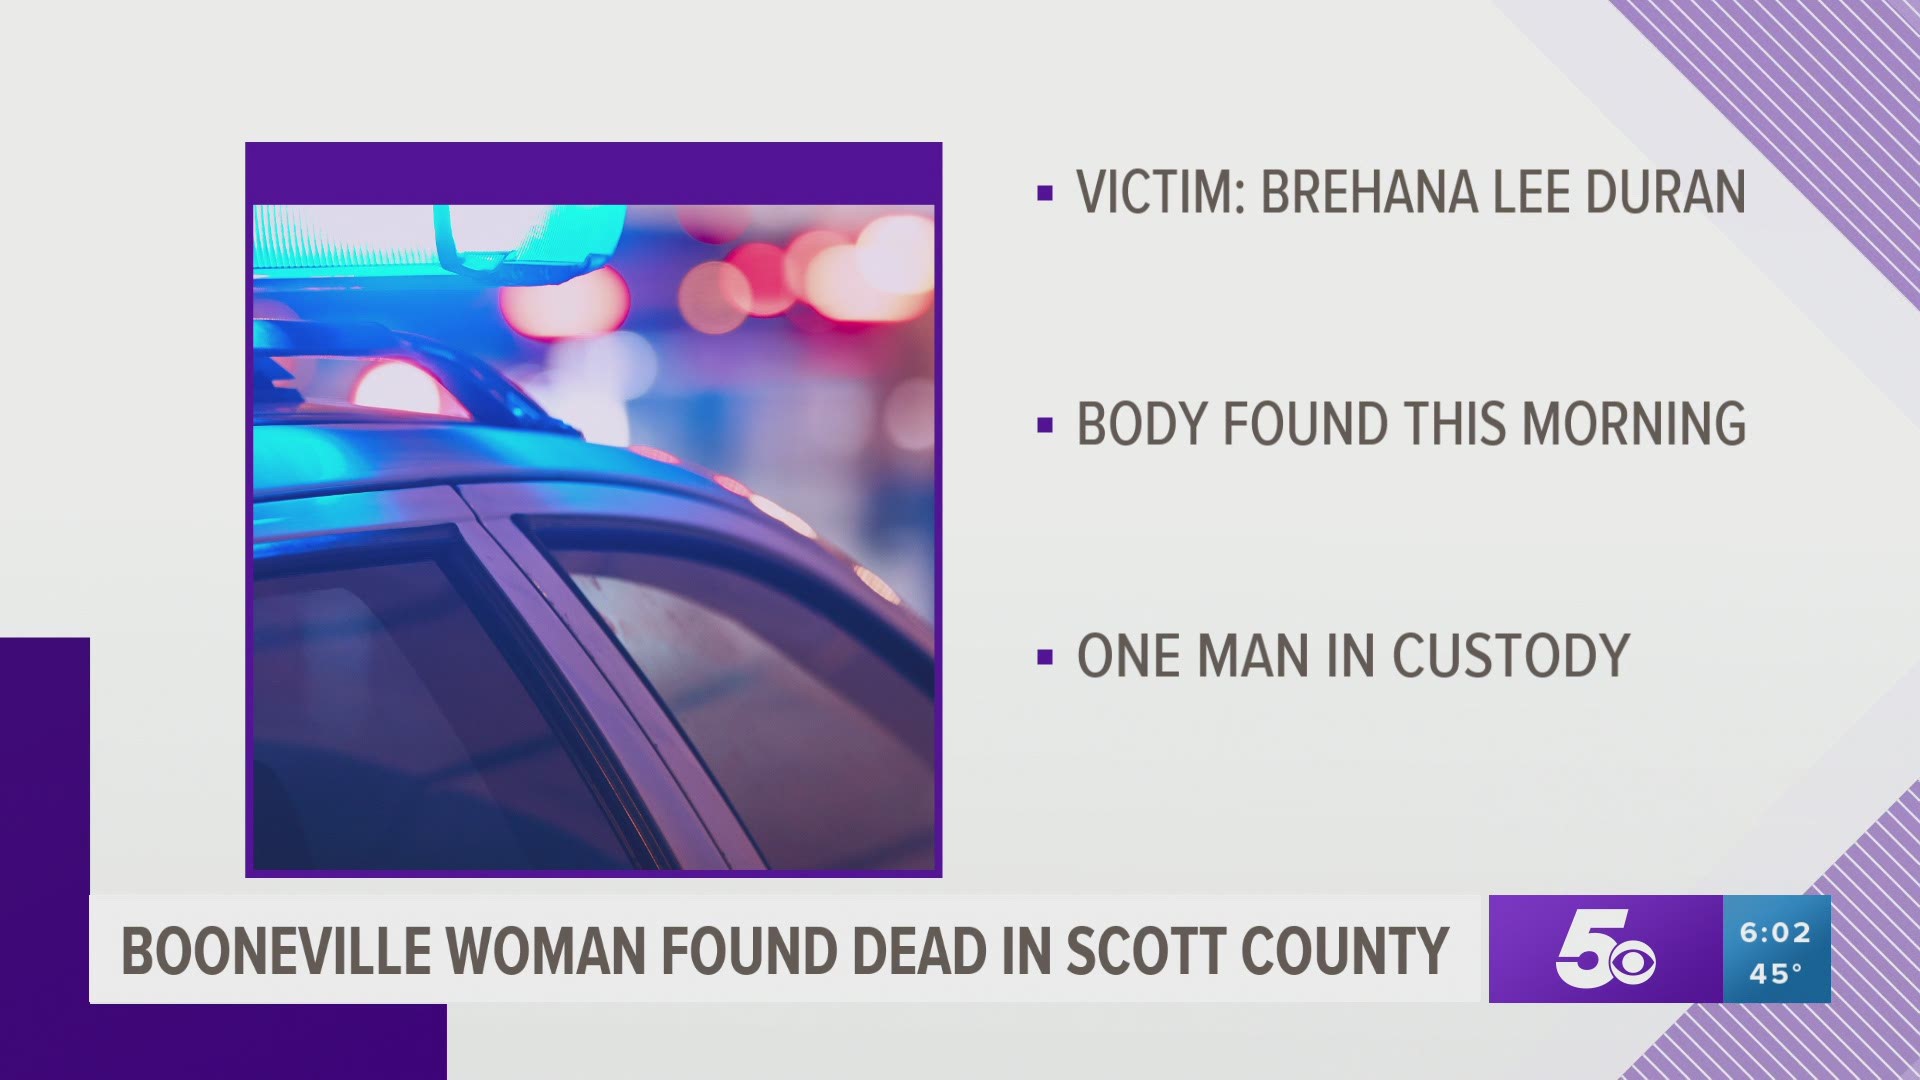 An apparent homicide was reported to the Scott County Sheriff's Department earlier today (Jan. 23).